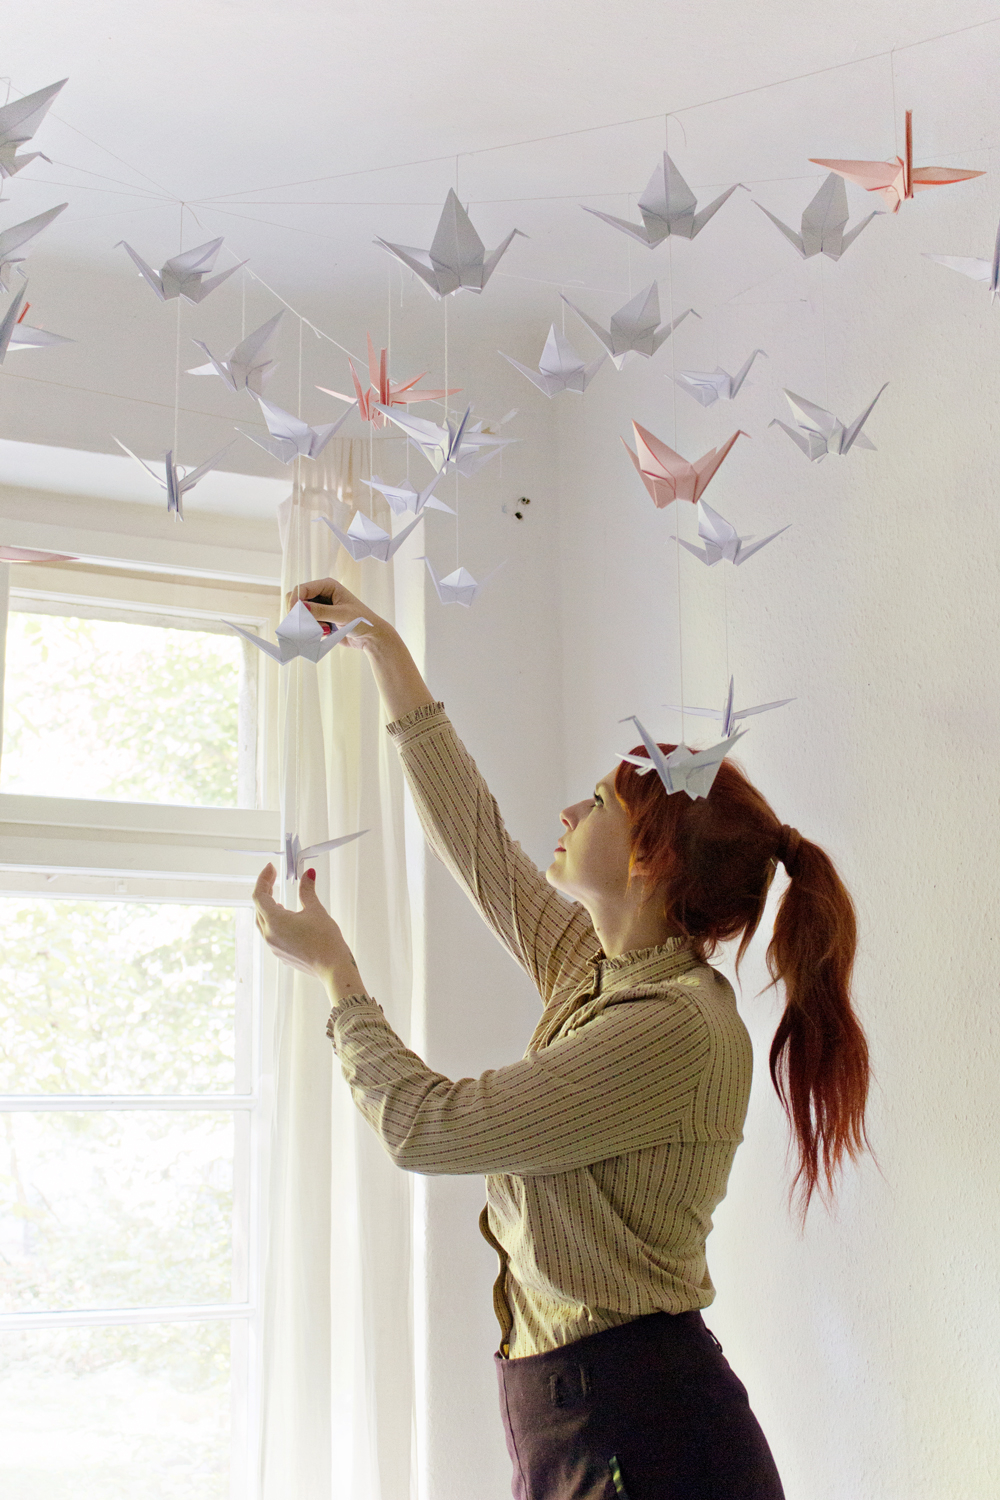 How To Make Origami Swans Diy Renters Friendly Origami Ceiling Decoration